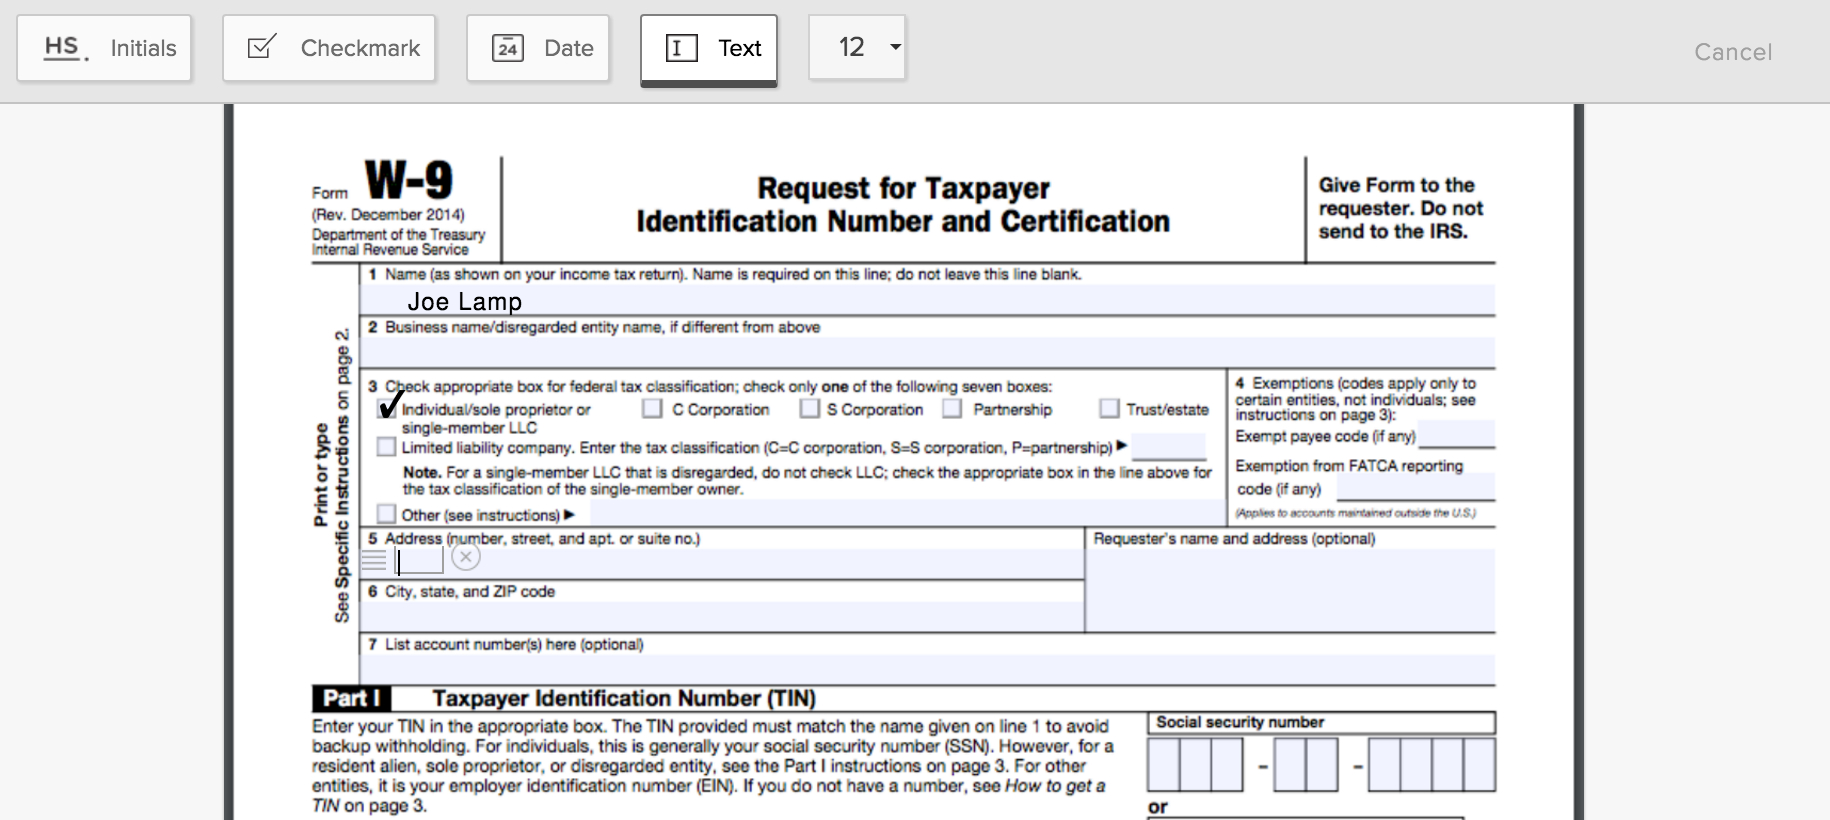 How To Fill Out A W-9 Form Online | Hellosign Blog - Free Printable I 9 Form 2016